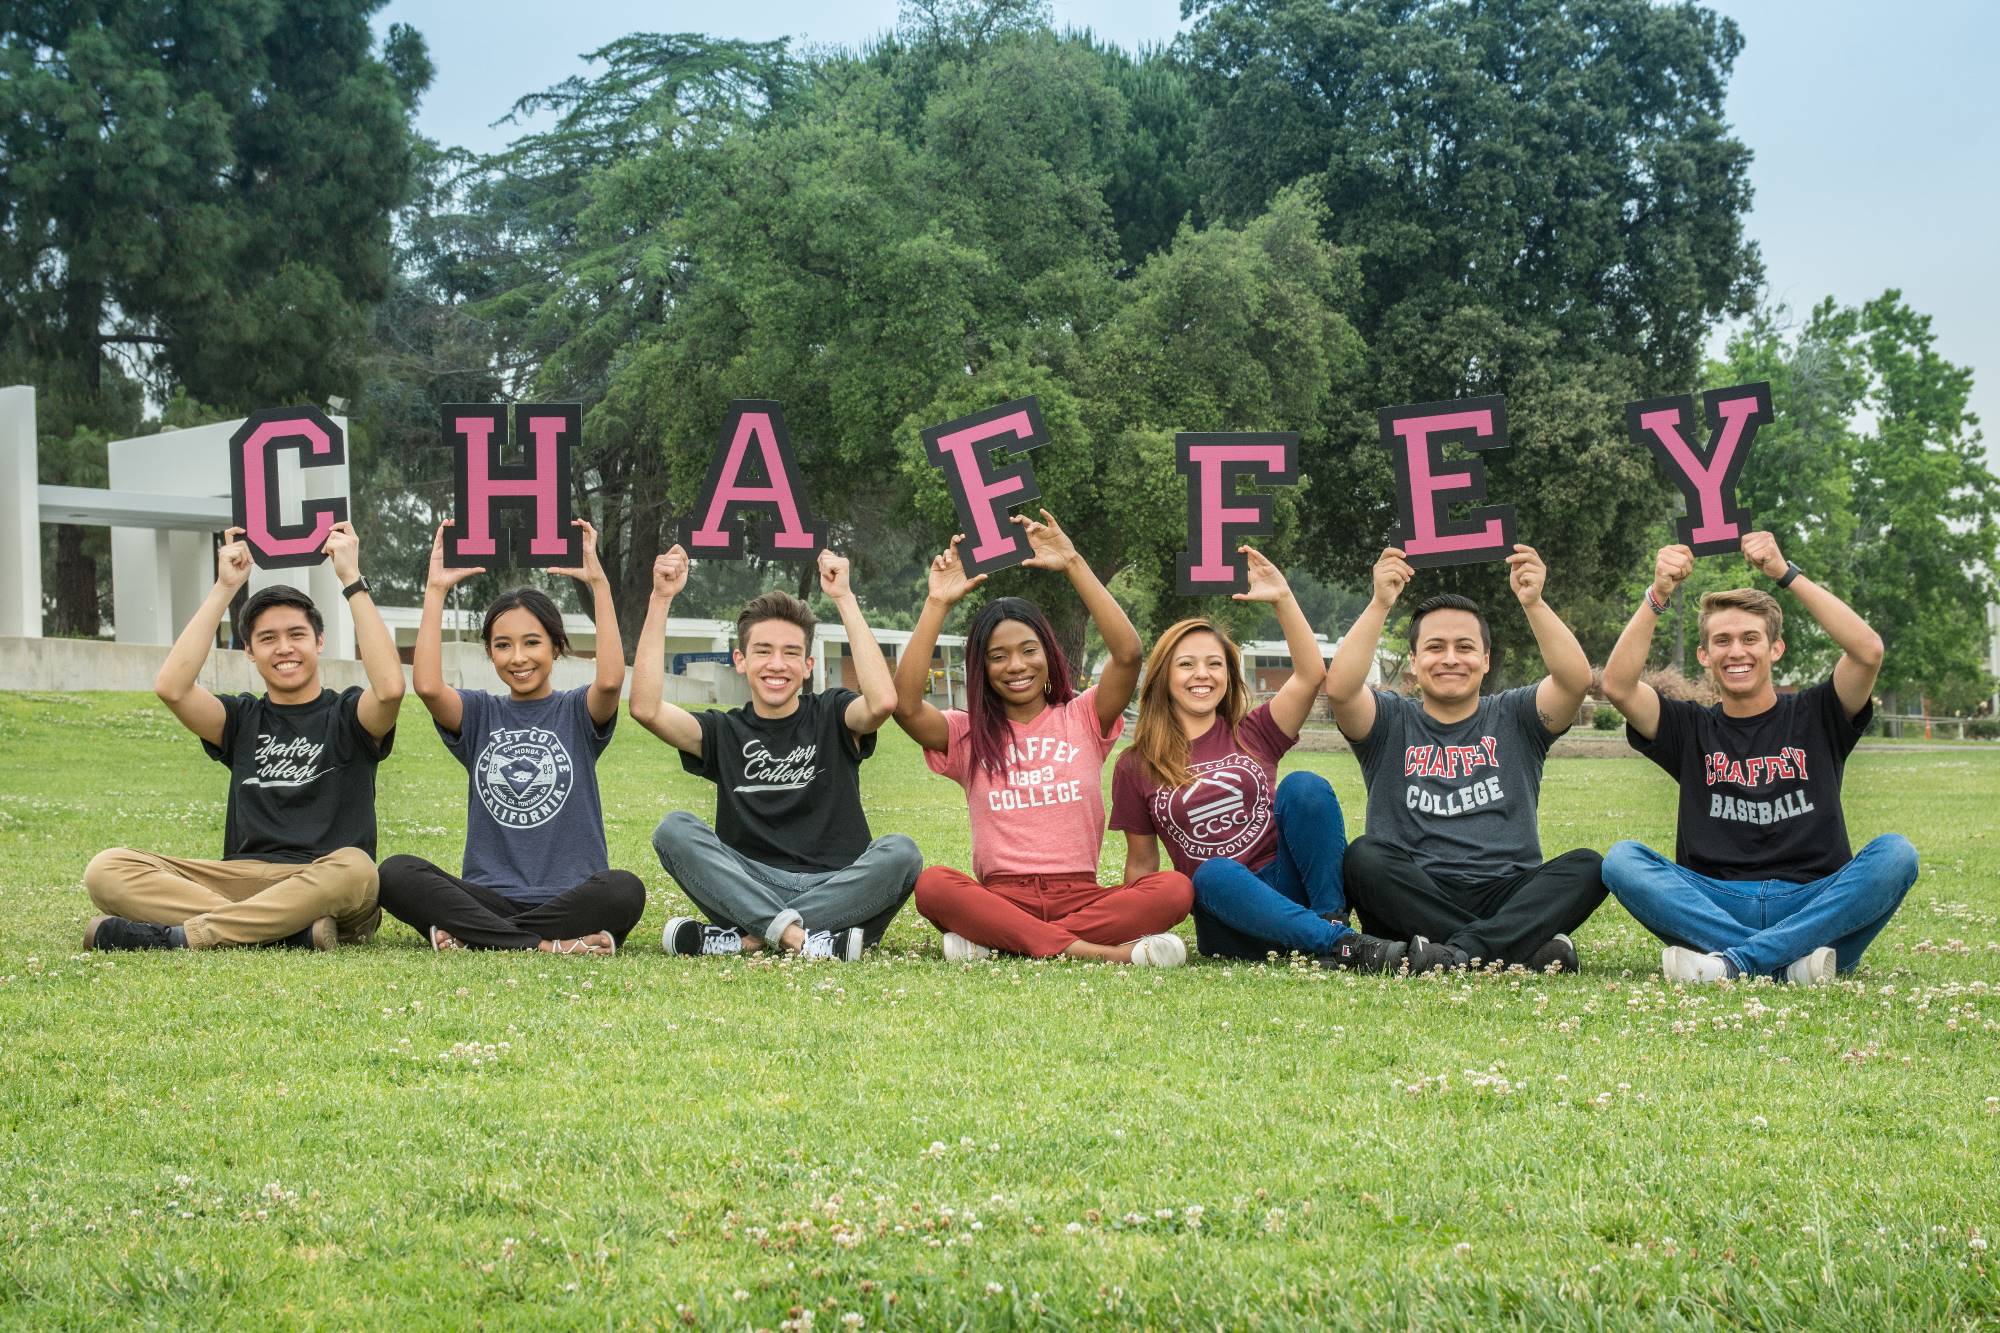 Students hold up the letters "Chaffey" as they sit on the grass on campus.